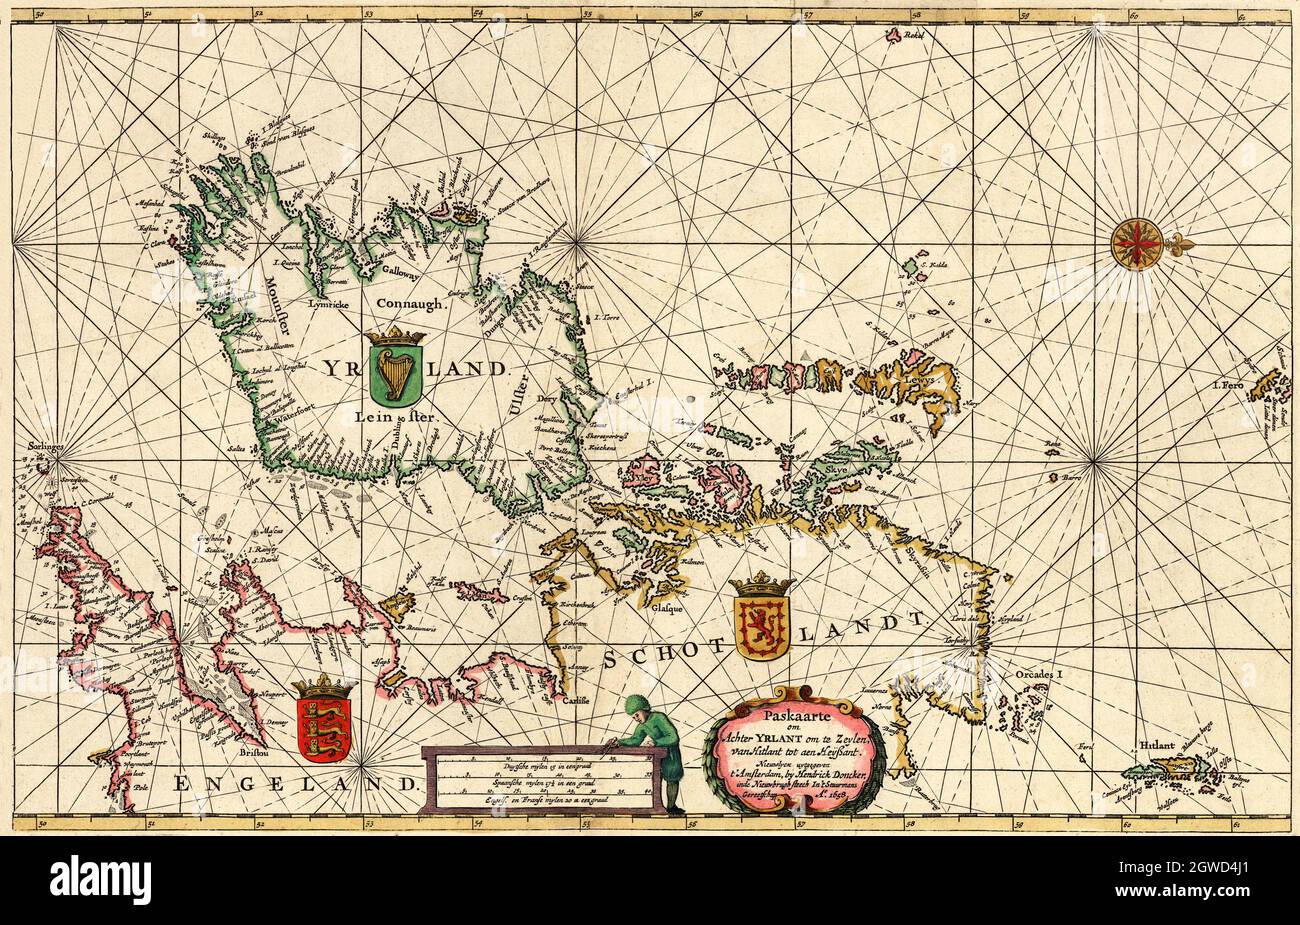 'Paskaarte om achter Yrlant om te zeylen, van Hitlant tot aen Heÿssant.' Tranlation:   Map from beyond Ireland to Zeylen, from Shetland to Ouessant. The map created in 1658 was by Hendrick Doncker (1626-1699), a bookseller and publisher in Amsterdam during the 17th Century. His sea atlases are based on his own work and have been known for their accuracy. NB This version has been modified and reduced in size. Stock Photo